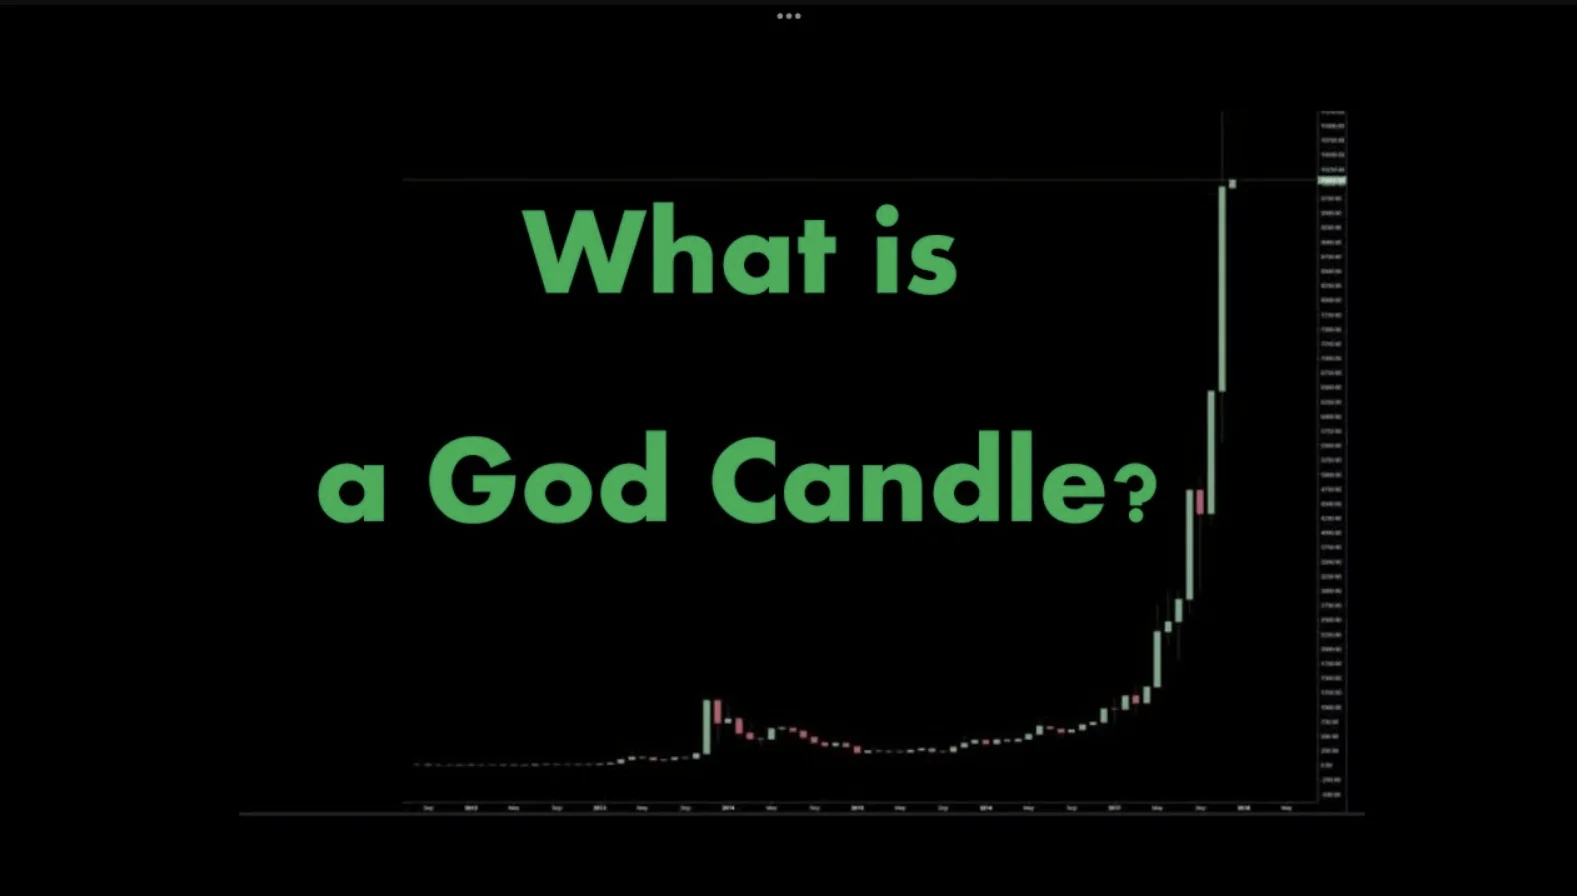 What is a god candle